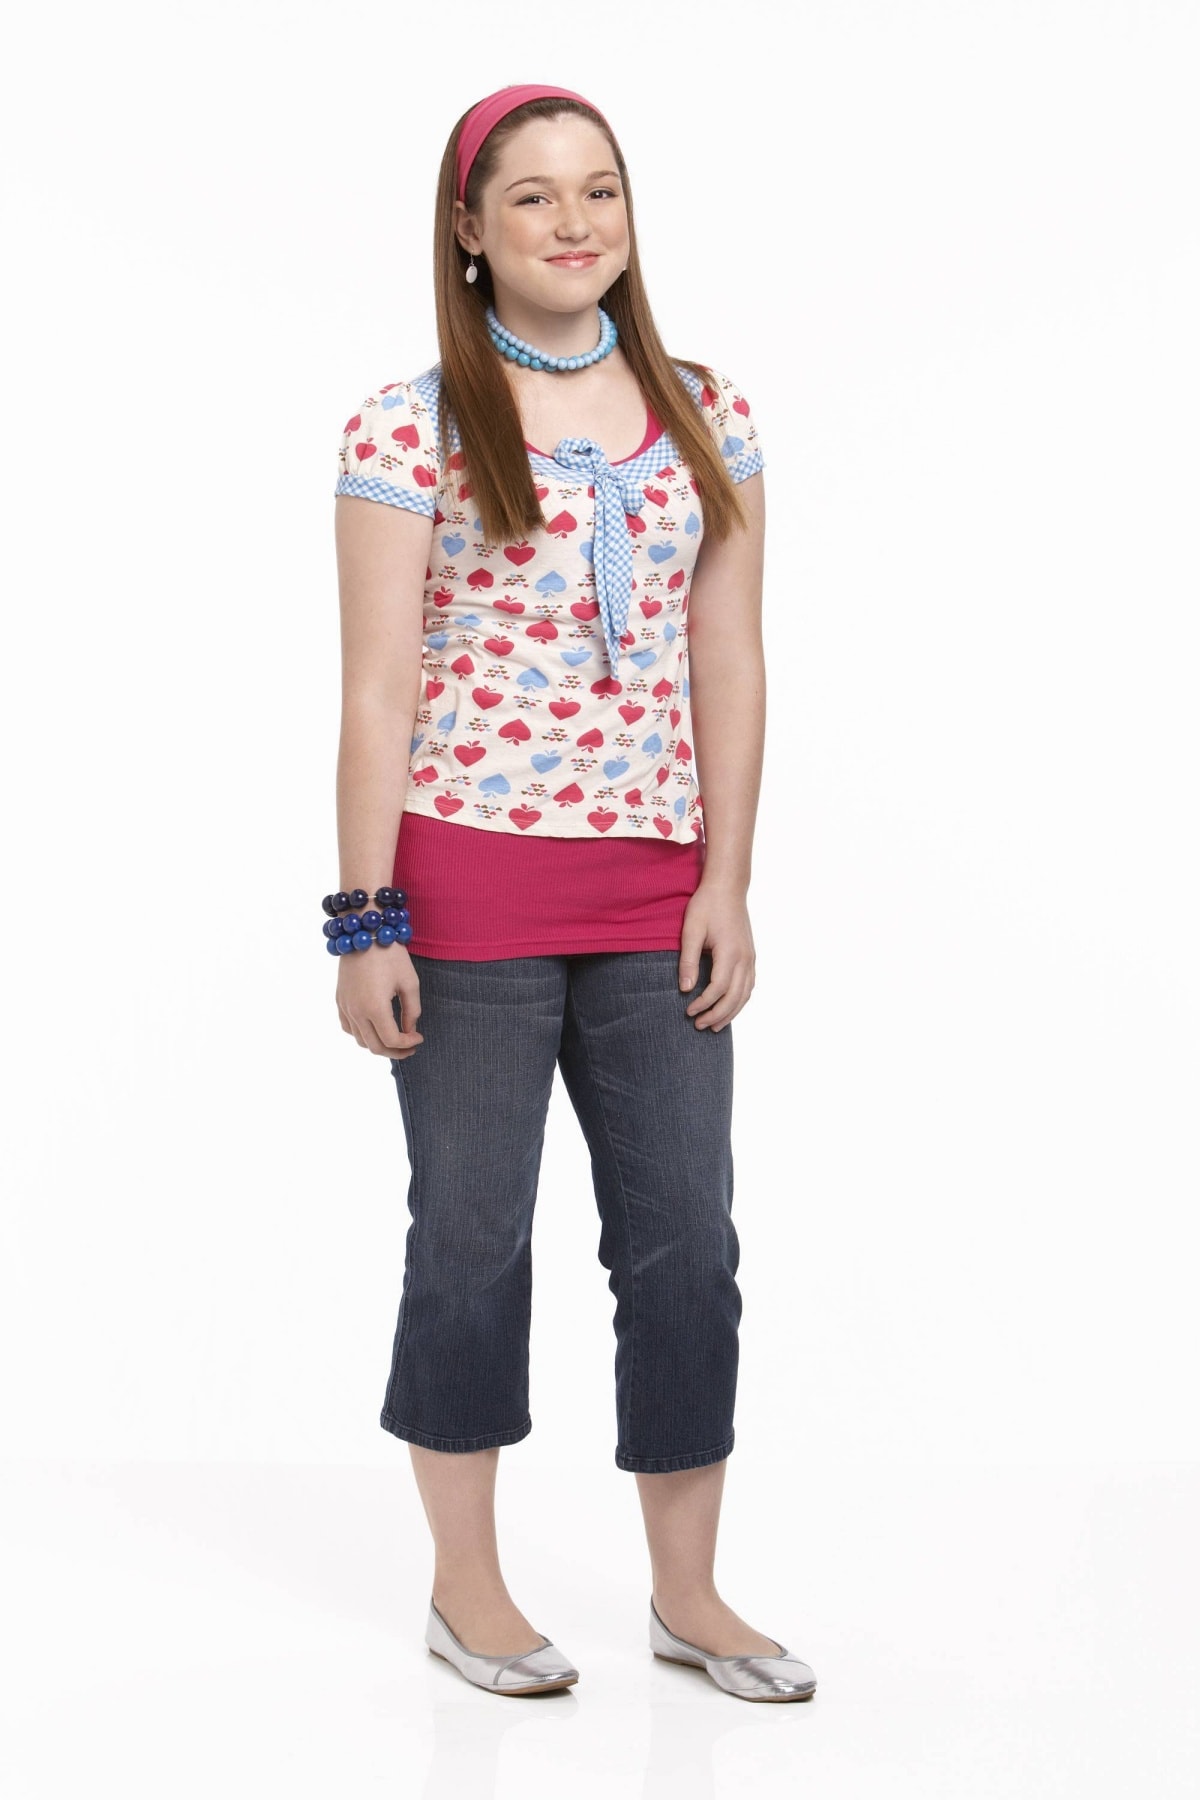 Promo shot of Jennifer Stone as Harper Finkle in the fantasy teen sitcom Wizards of Waverly Place